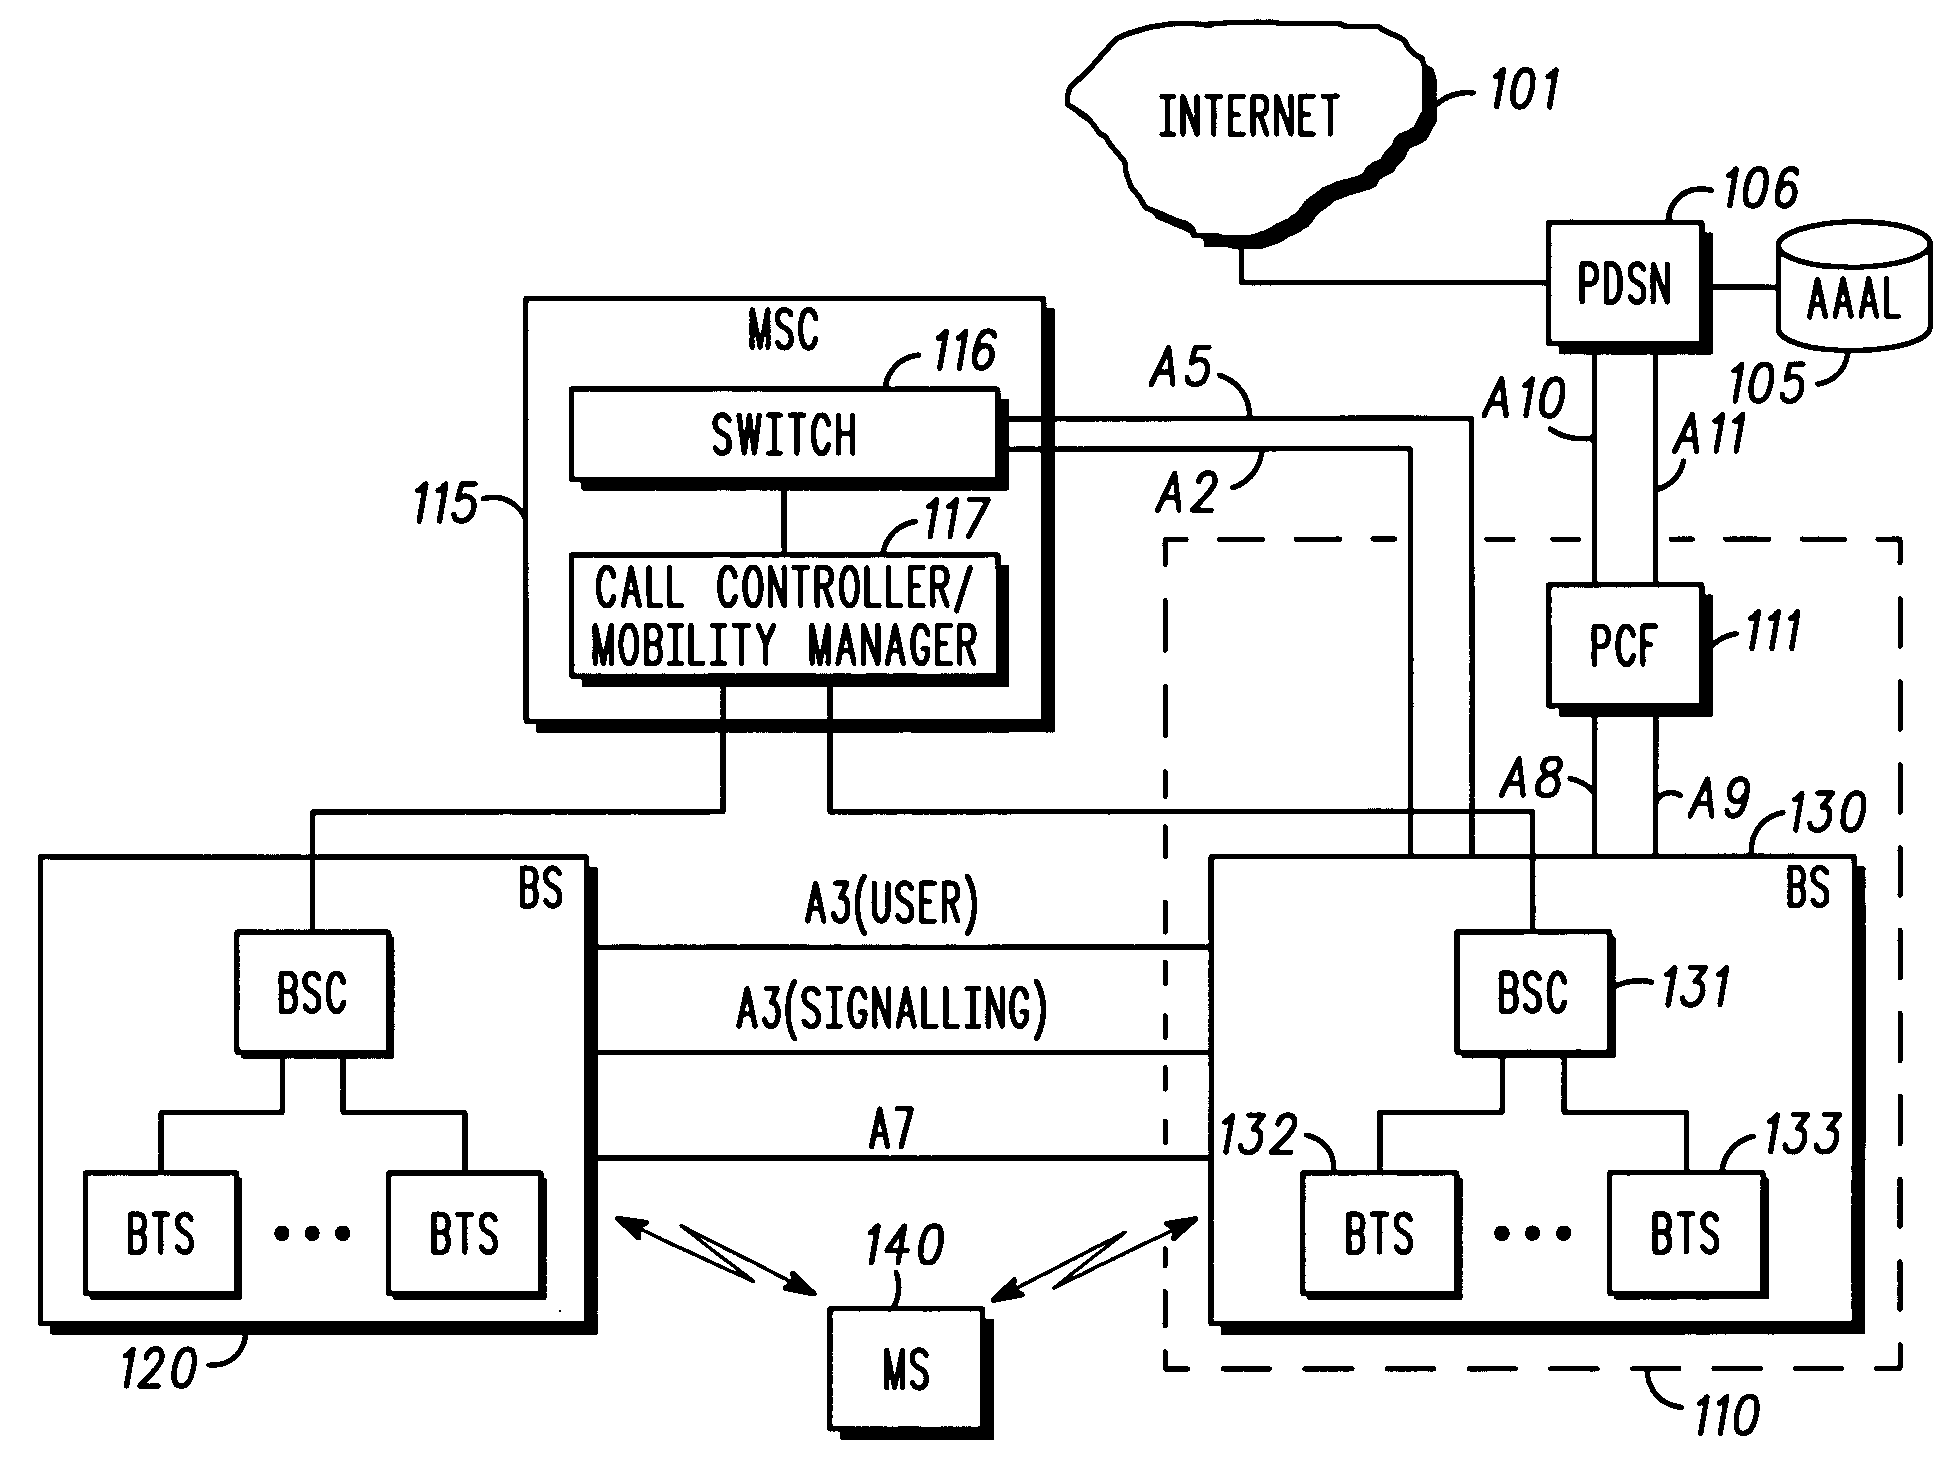 Packet data serving node initiated updates for a mobile communications system